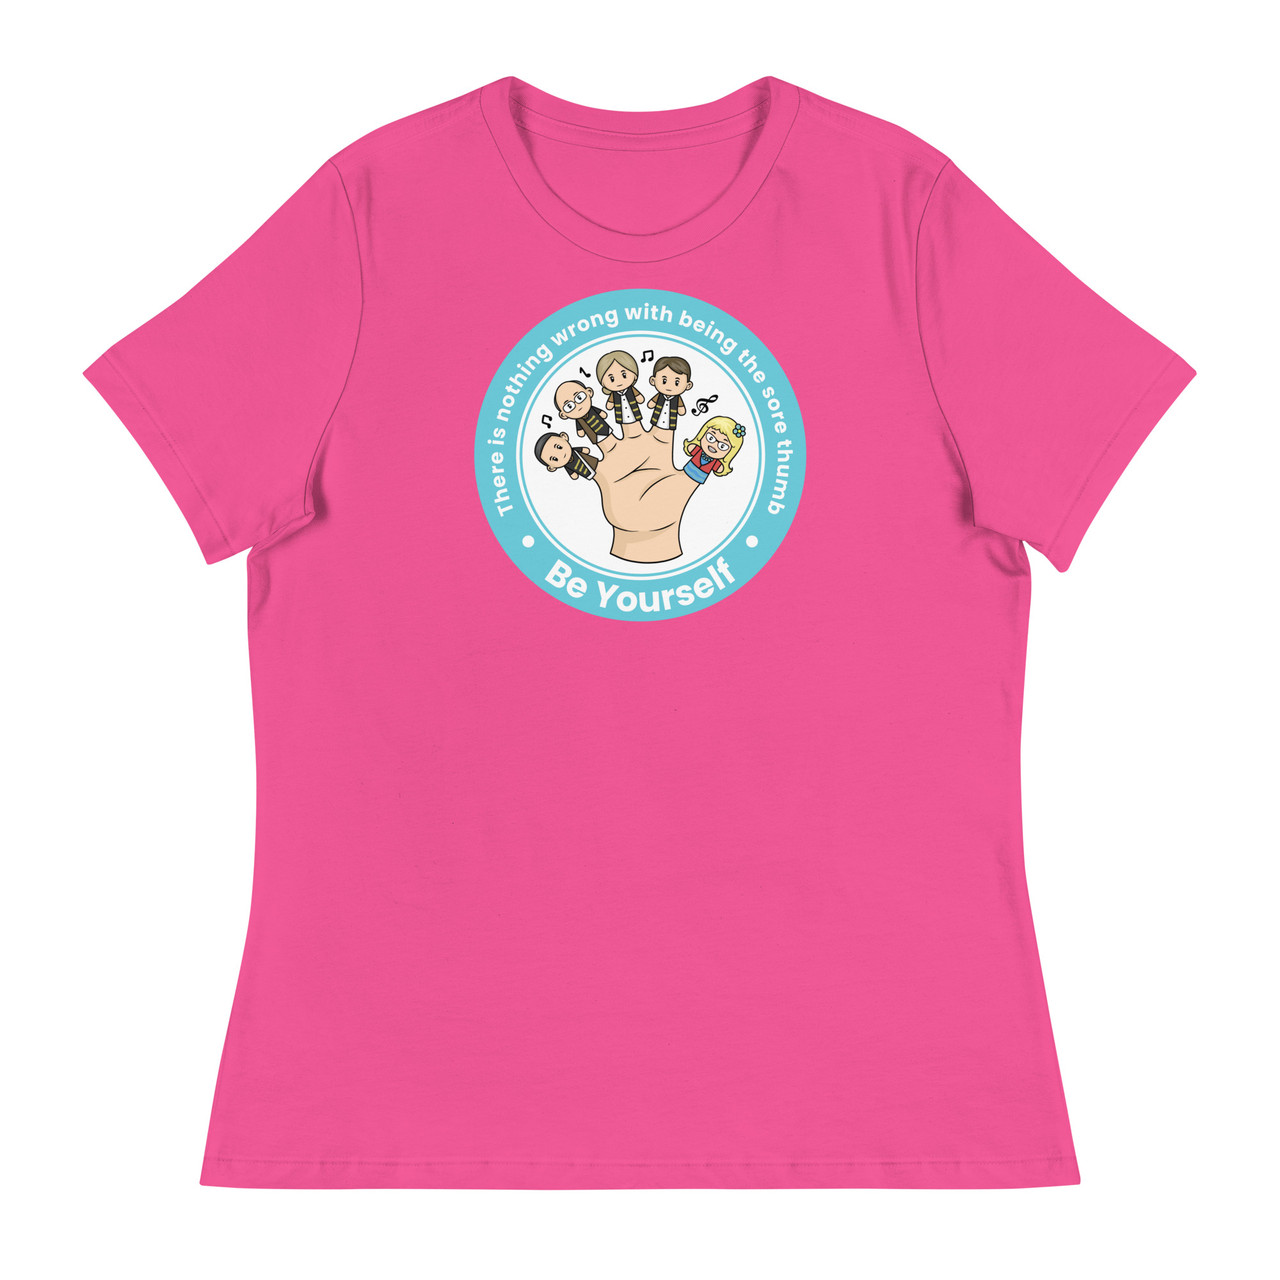 Stick Out Like A Sore Thumb Women's Relaxed T-Shirt - Bella + Canvas 6400 